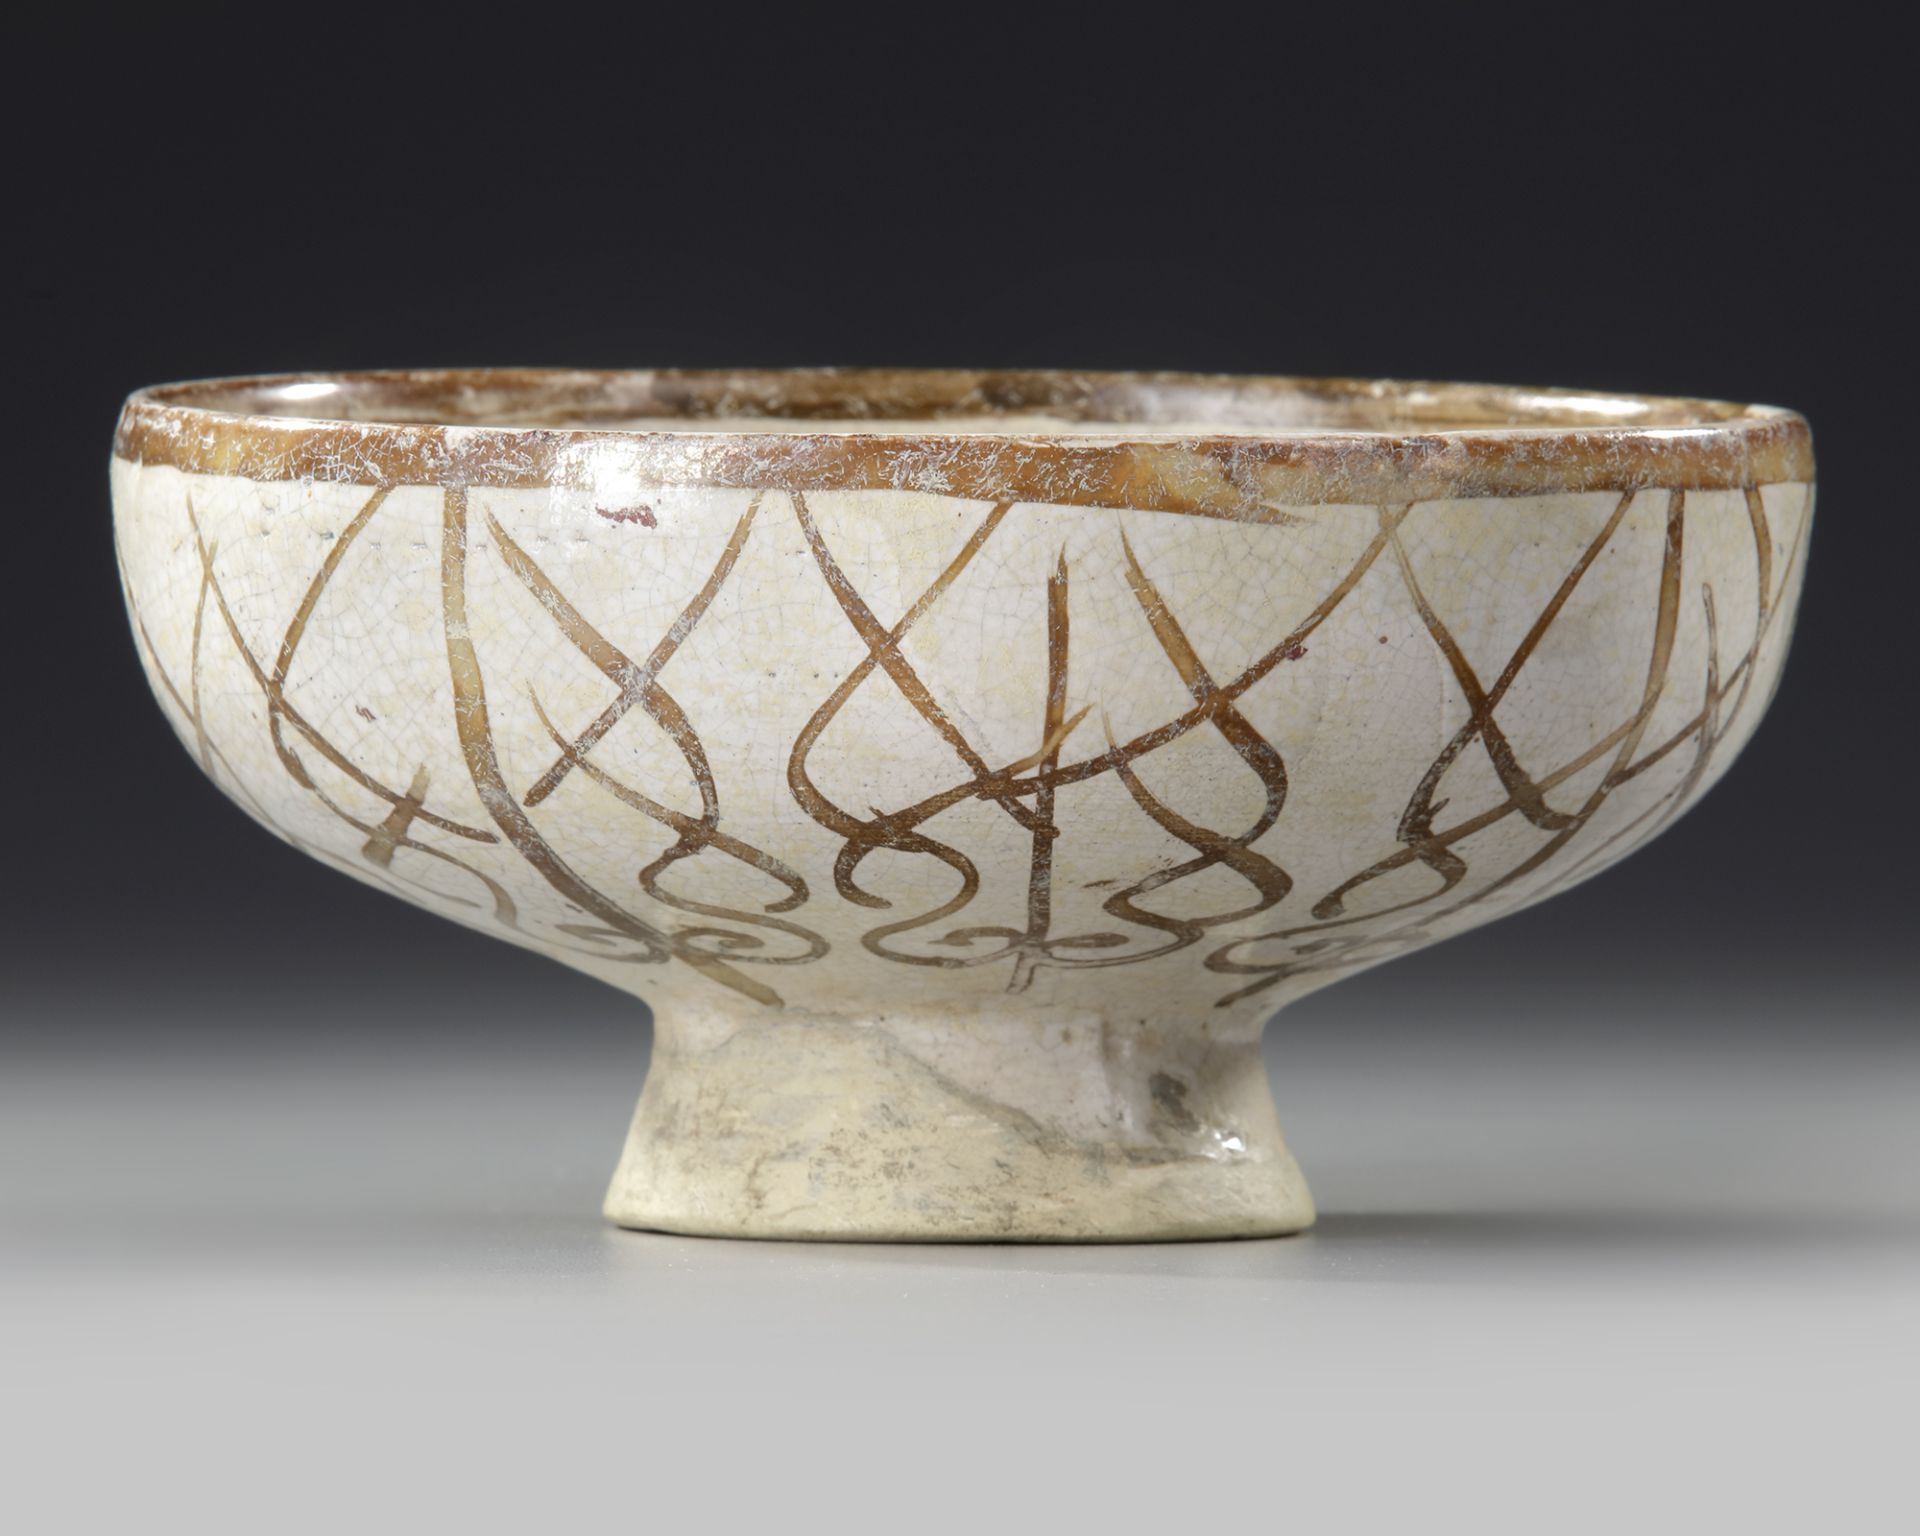 A KASHAN LUSTRE POTTERY BOWL, PERSIA, LATE 12TH - EARLY 13TH CENTURY - Image 7 of 8